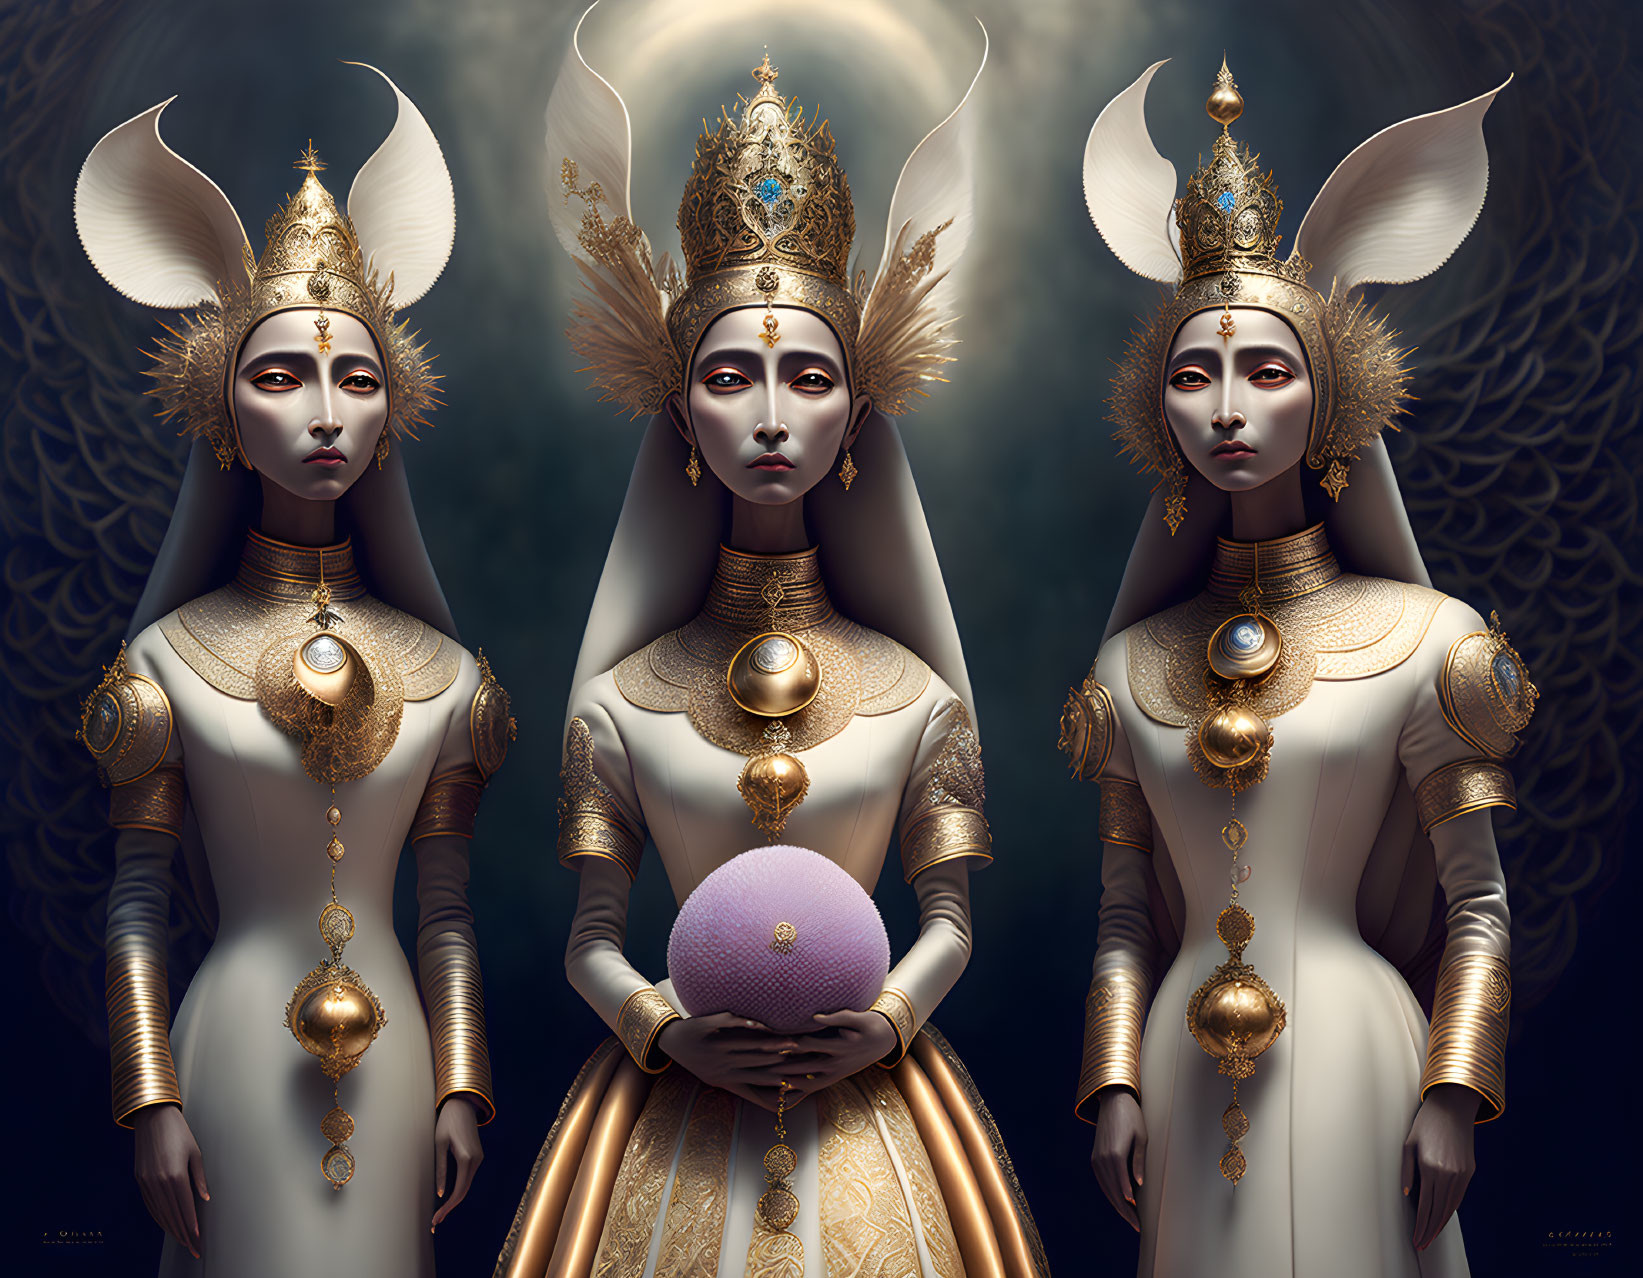 Regal figures in gold and white attire with elaborate headdresses and purple orb.